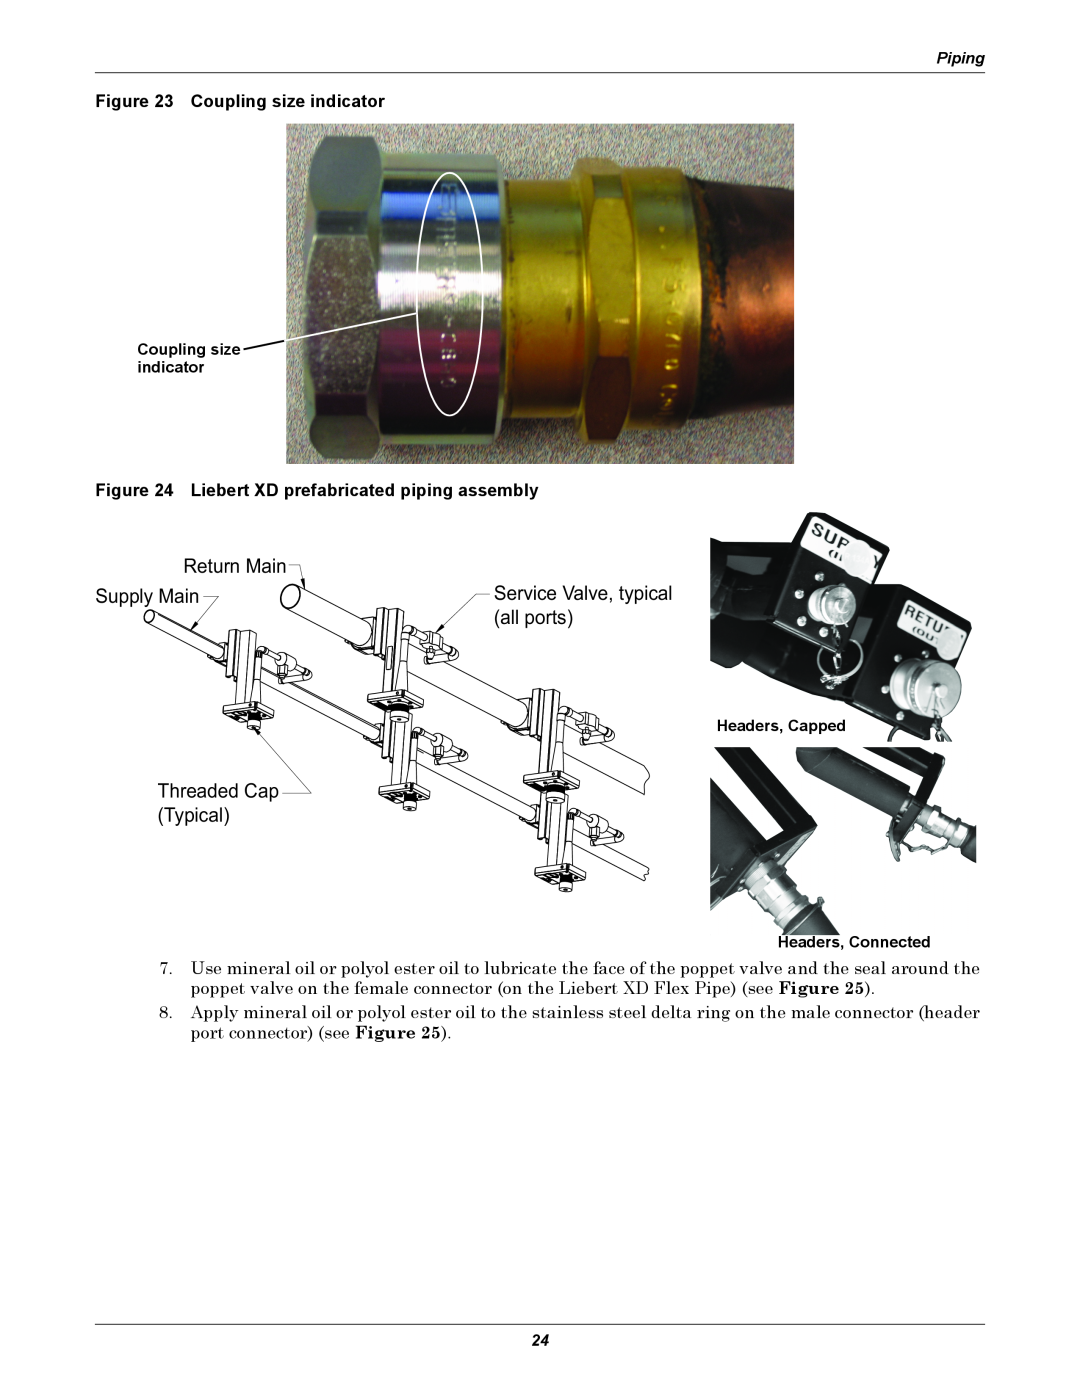 Emerson XDR user manual Return Main, Supply Main, all ports, Threaded Cap Typical, Service Valve, typical 